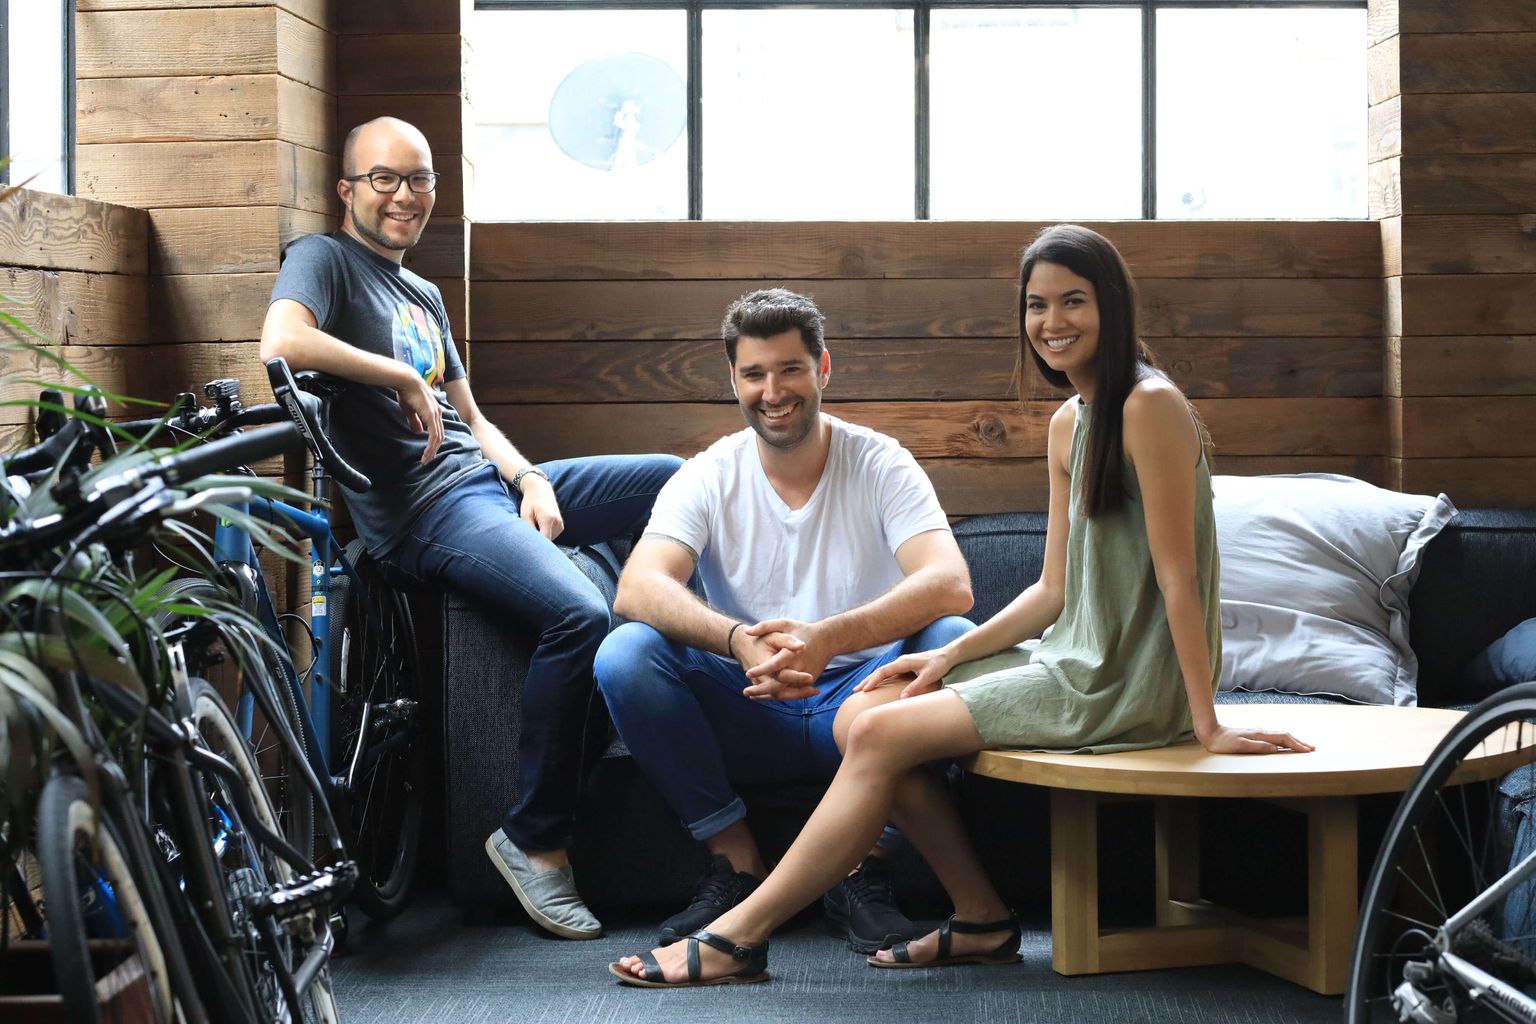 Canva founders, pictured from left to right, are Cameron Adams, Cliff Obrecht and Melanie Perkins.